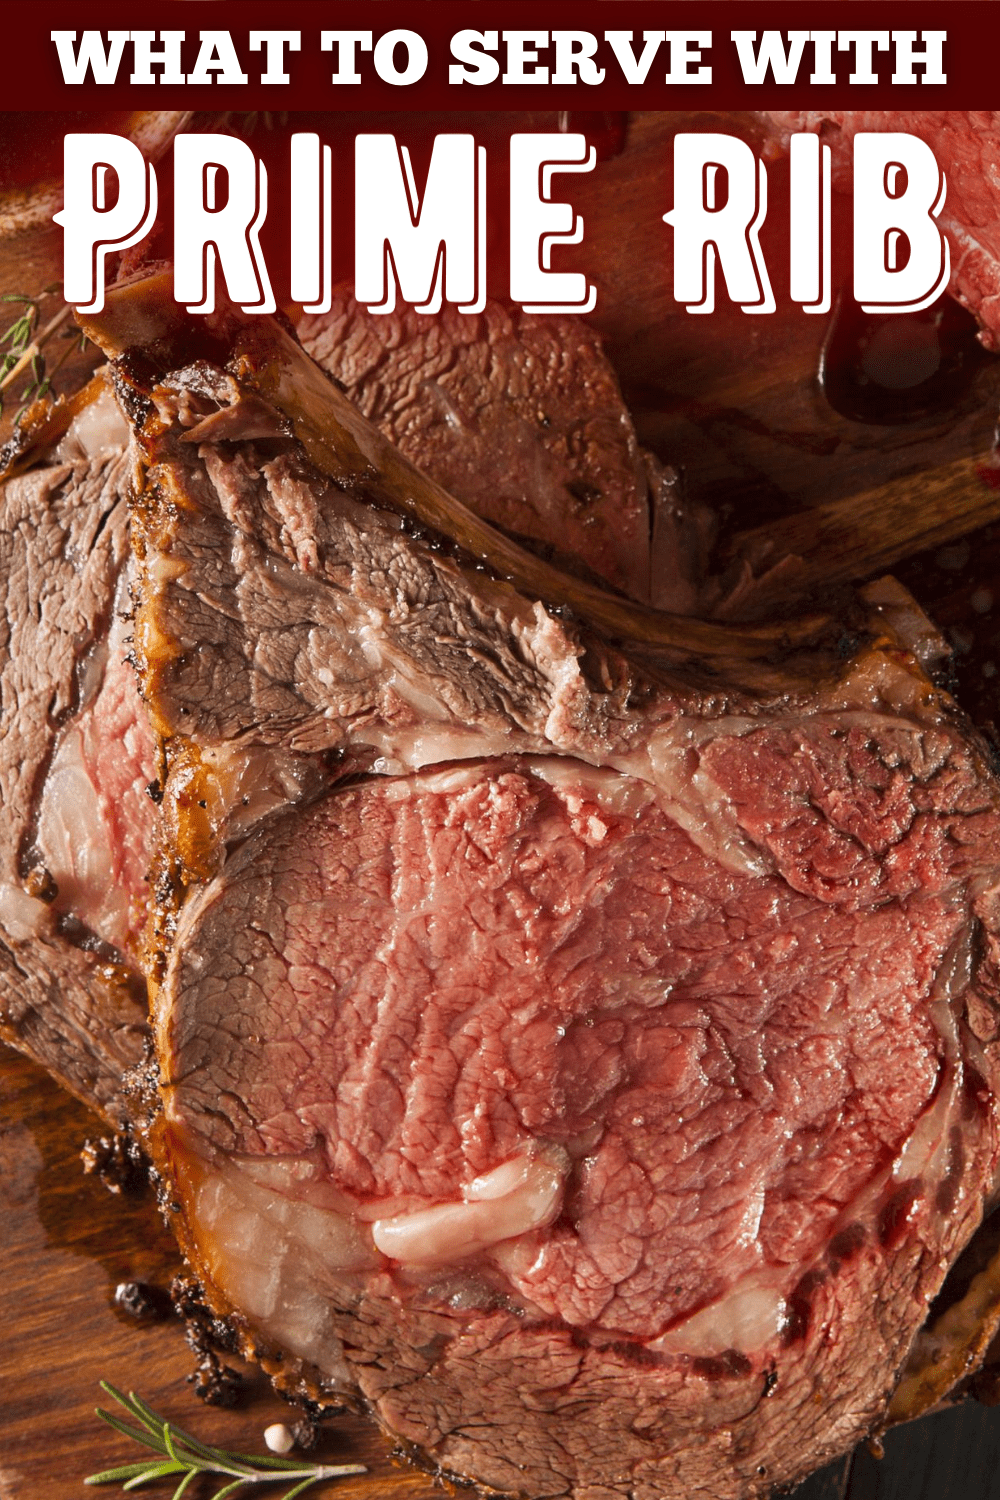 What to Serve with Prime Rib (18 Savory Side Dishes) - Insanely Good